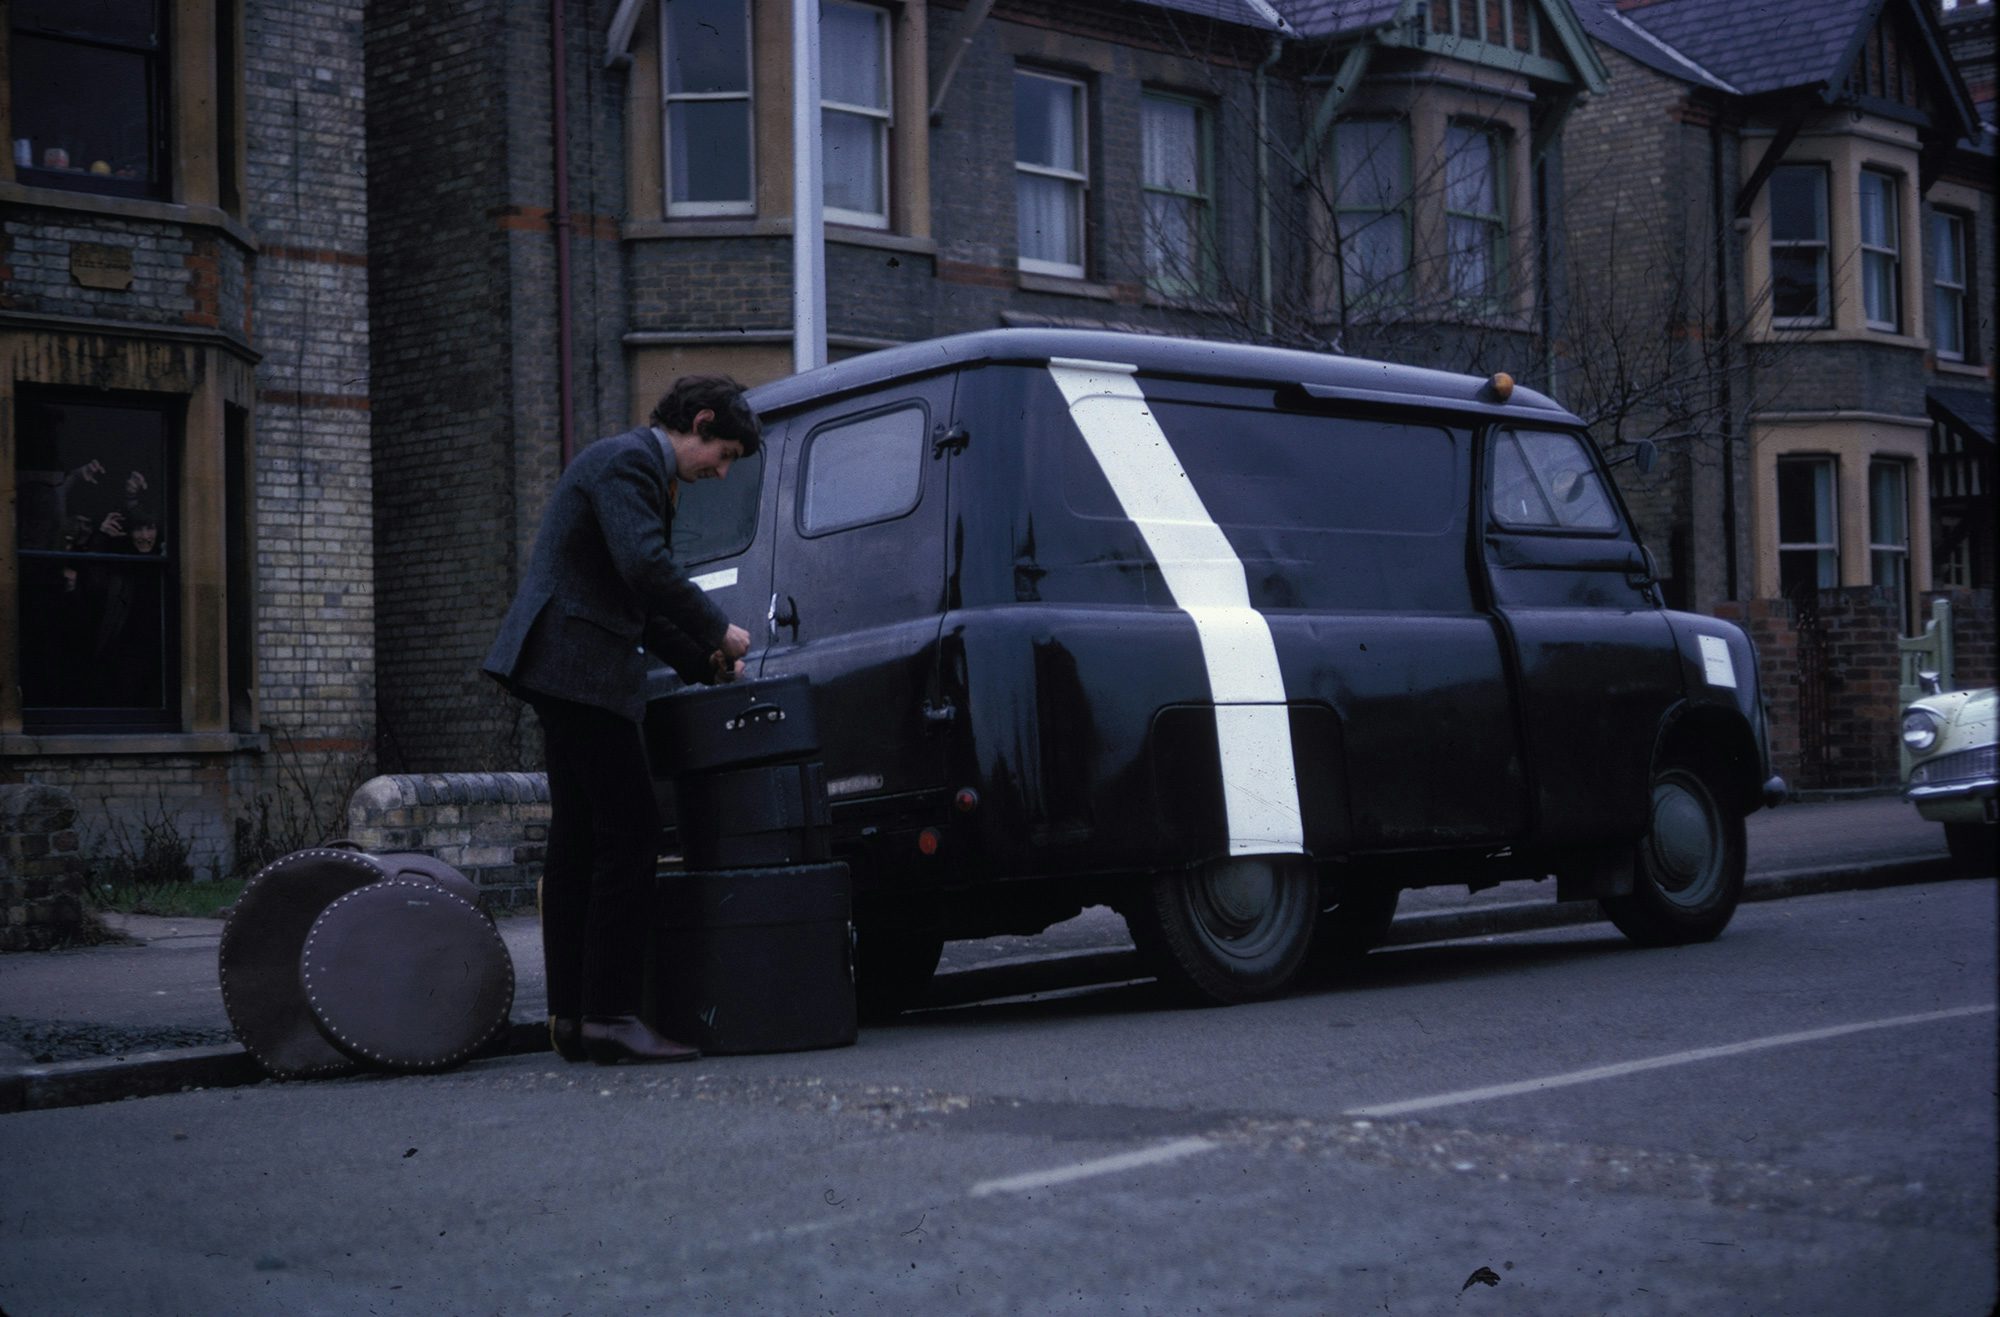 Nick Mason loading his drum kit into the Bedford van in 1965 on Rock Road, Cambridge. Image: Pink Floyd Archive